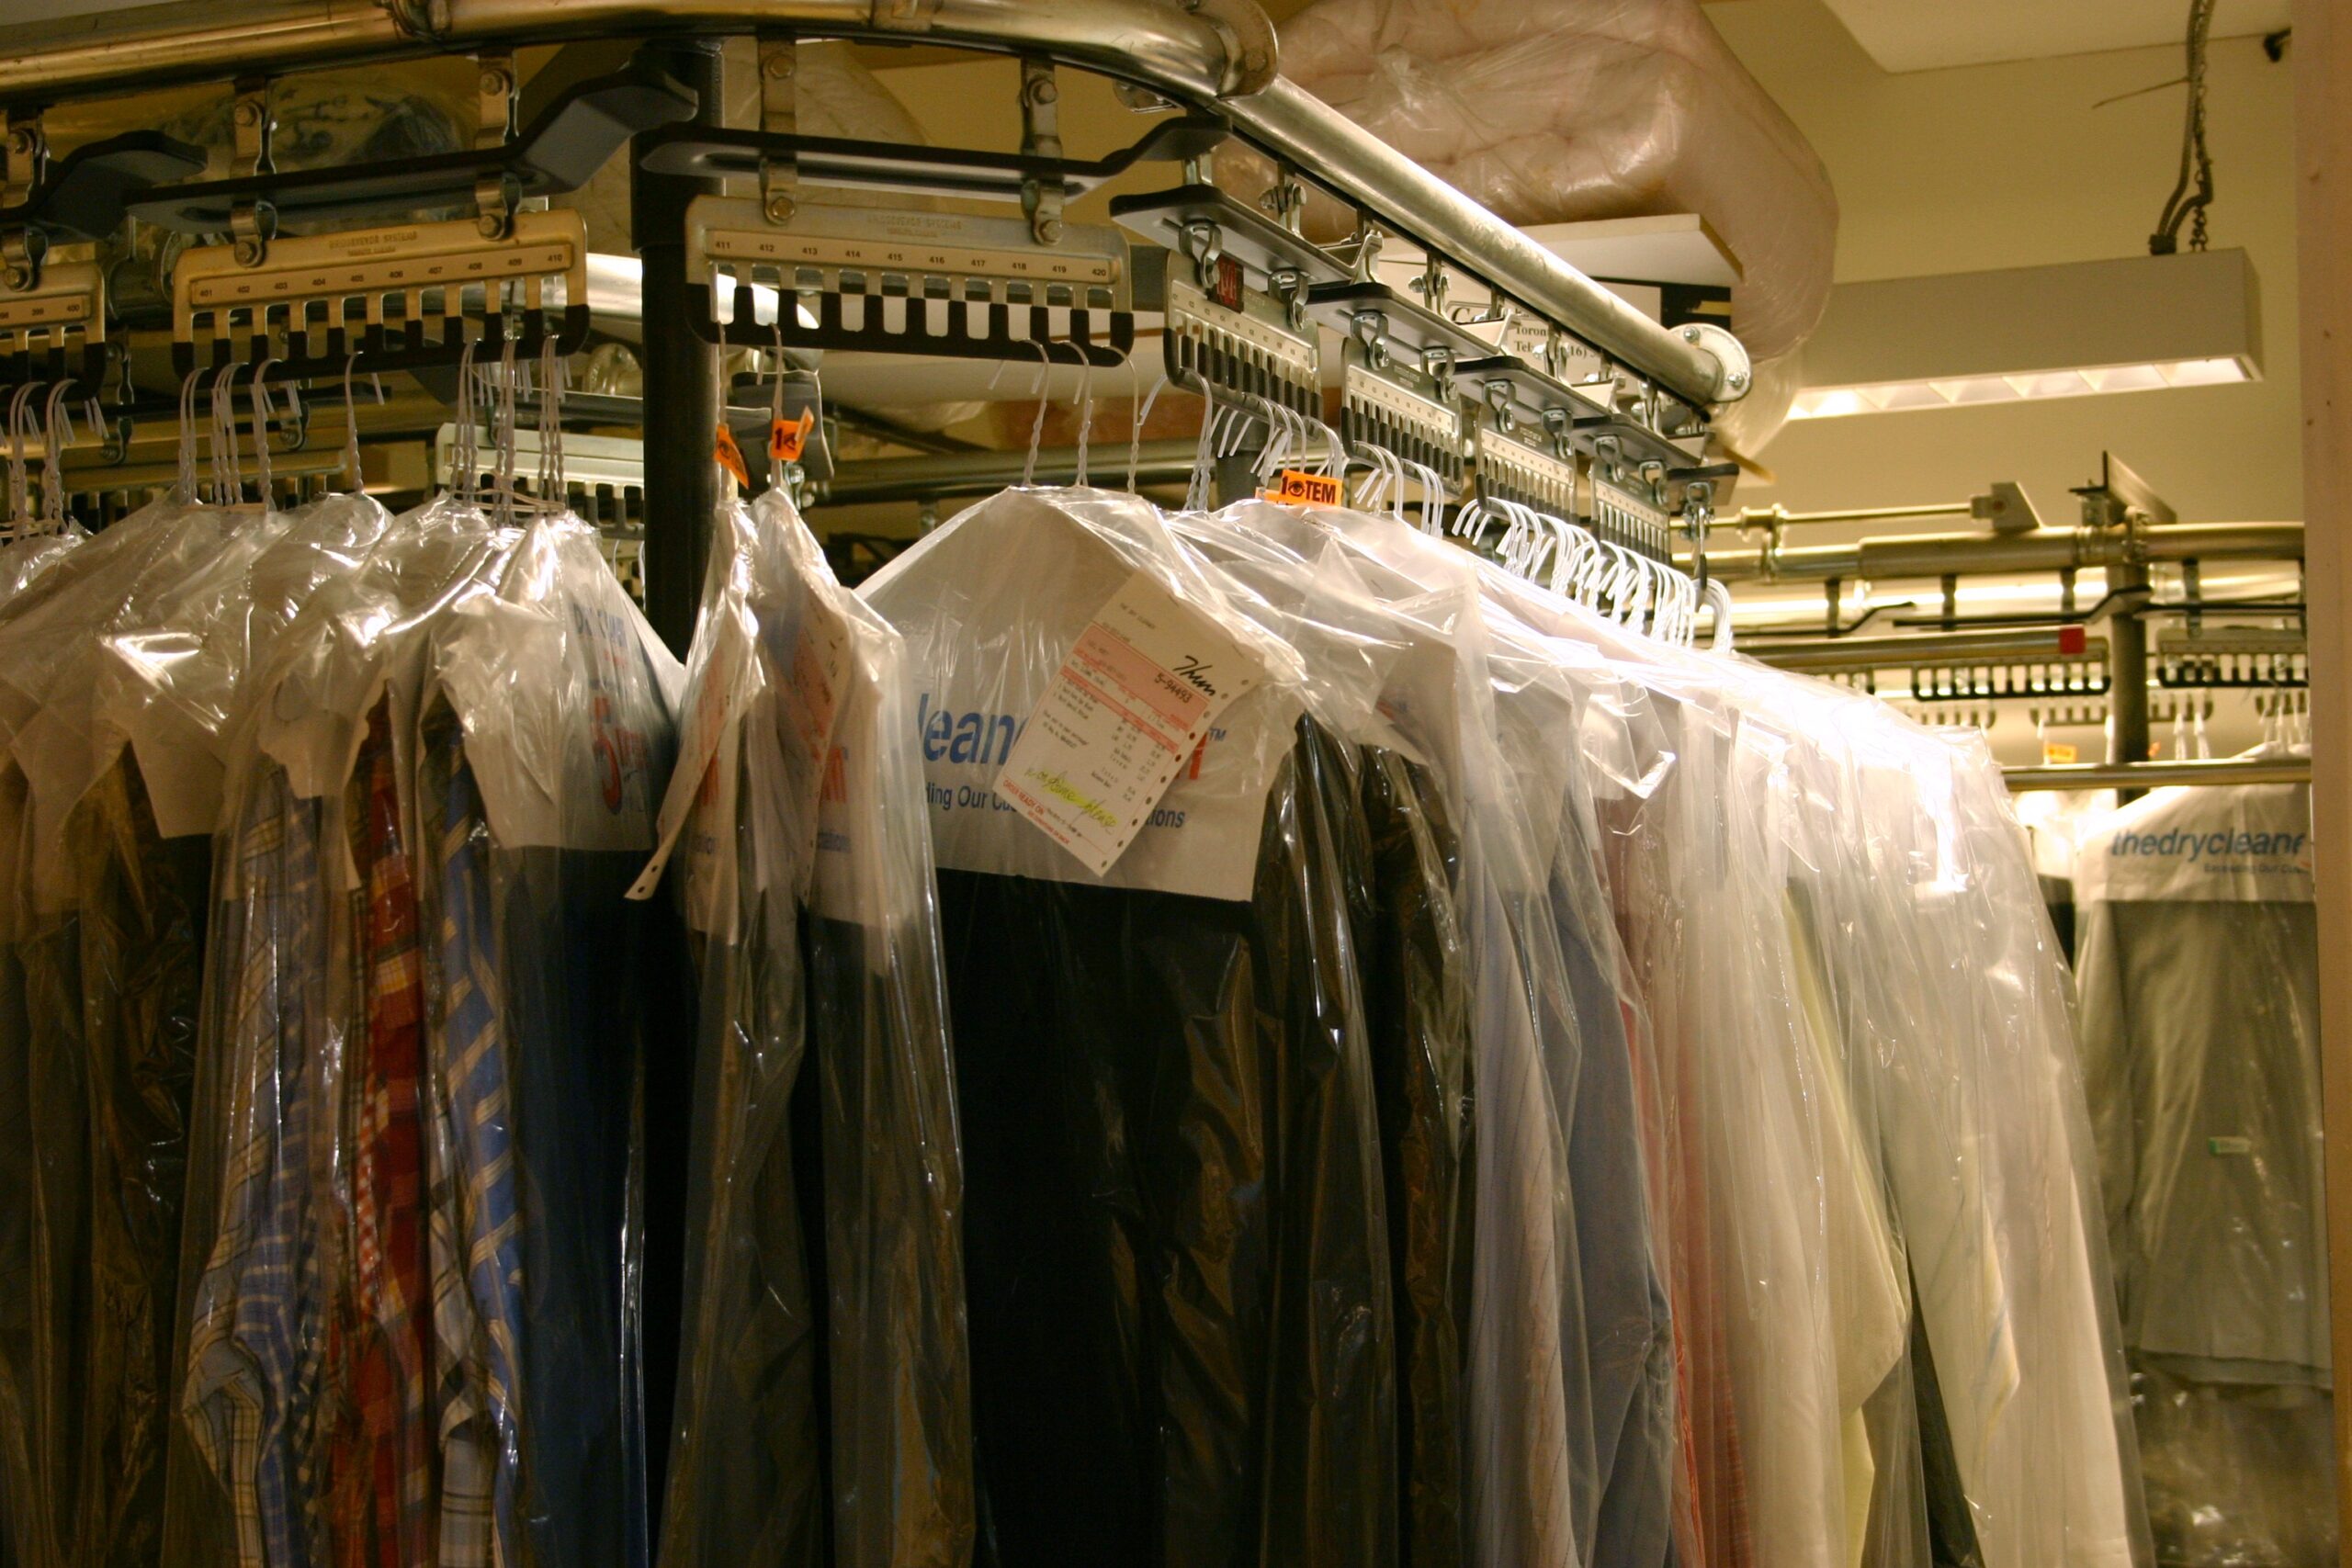 How Much Does Dry Cleaning Cost?